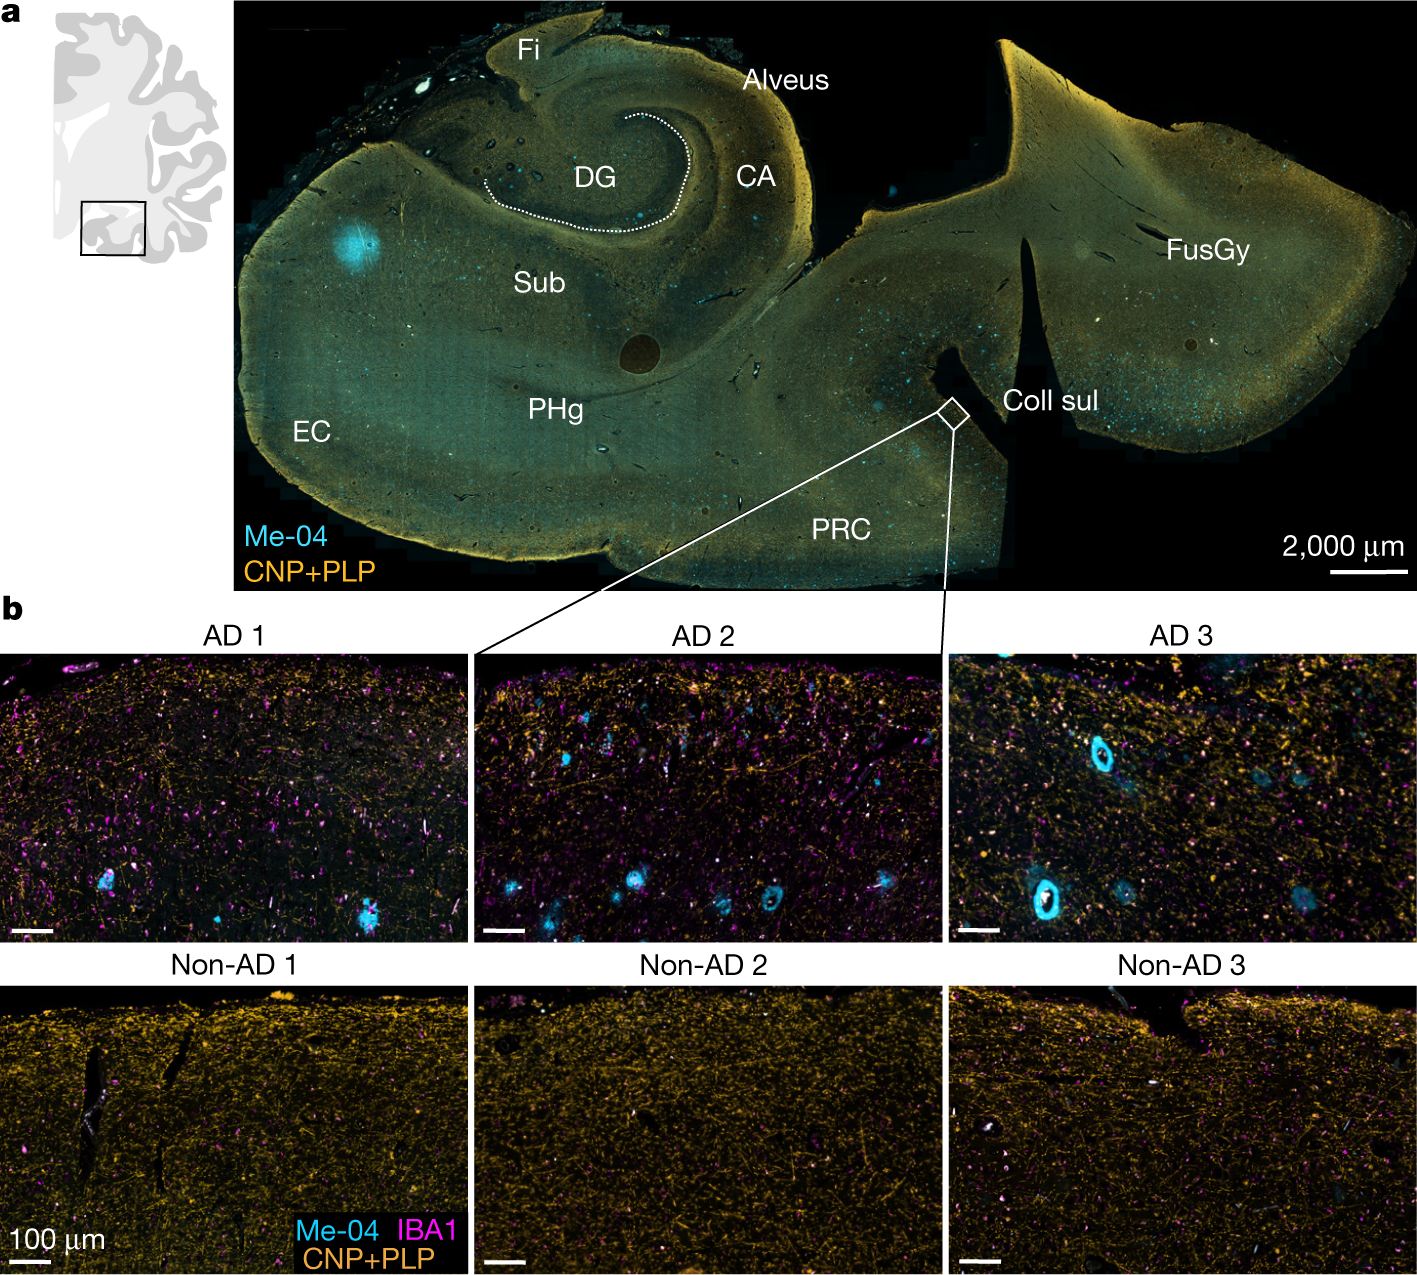 Myelin dysfunction drives amyloid-β deposition in models of